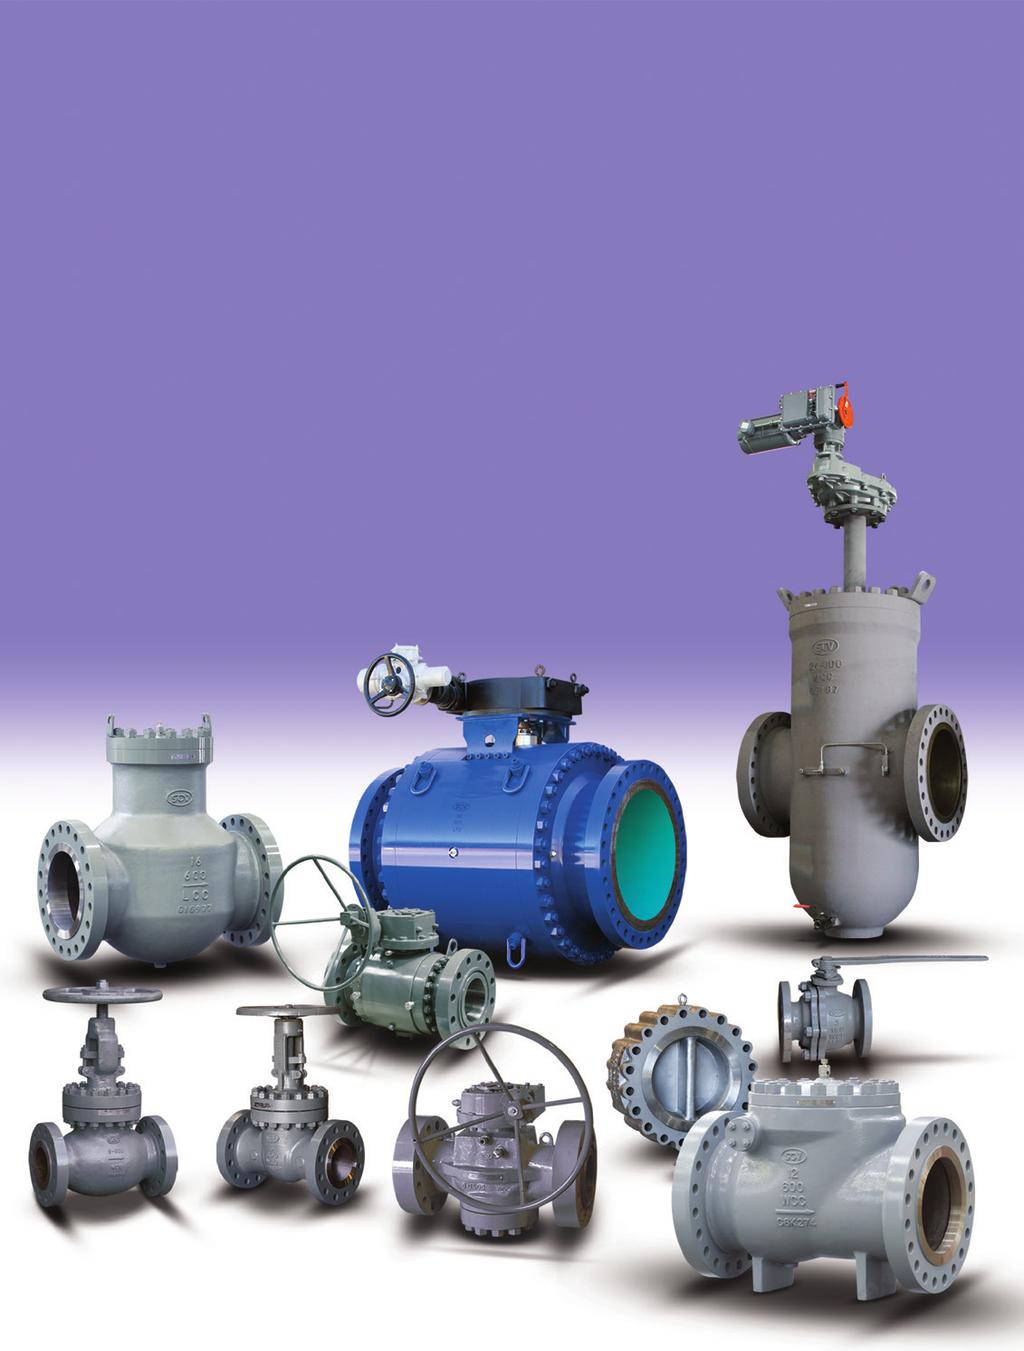 Meet the Family The Go-To Source For All Your Valve Needs SCV Valve s product family has you covered for all of you upstream, midstream and downstream applications.